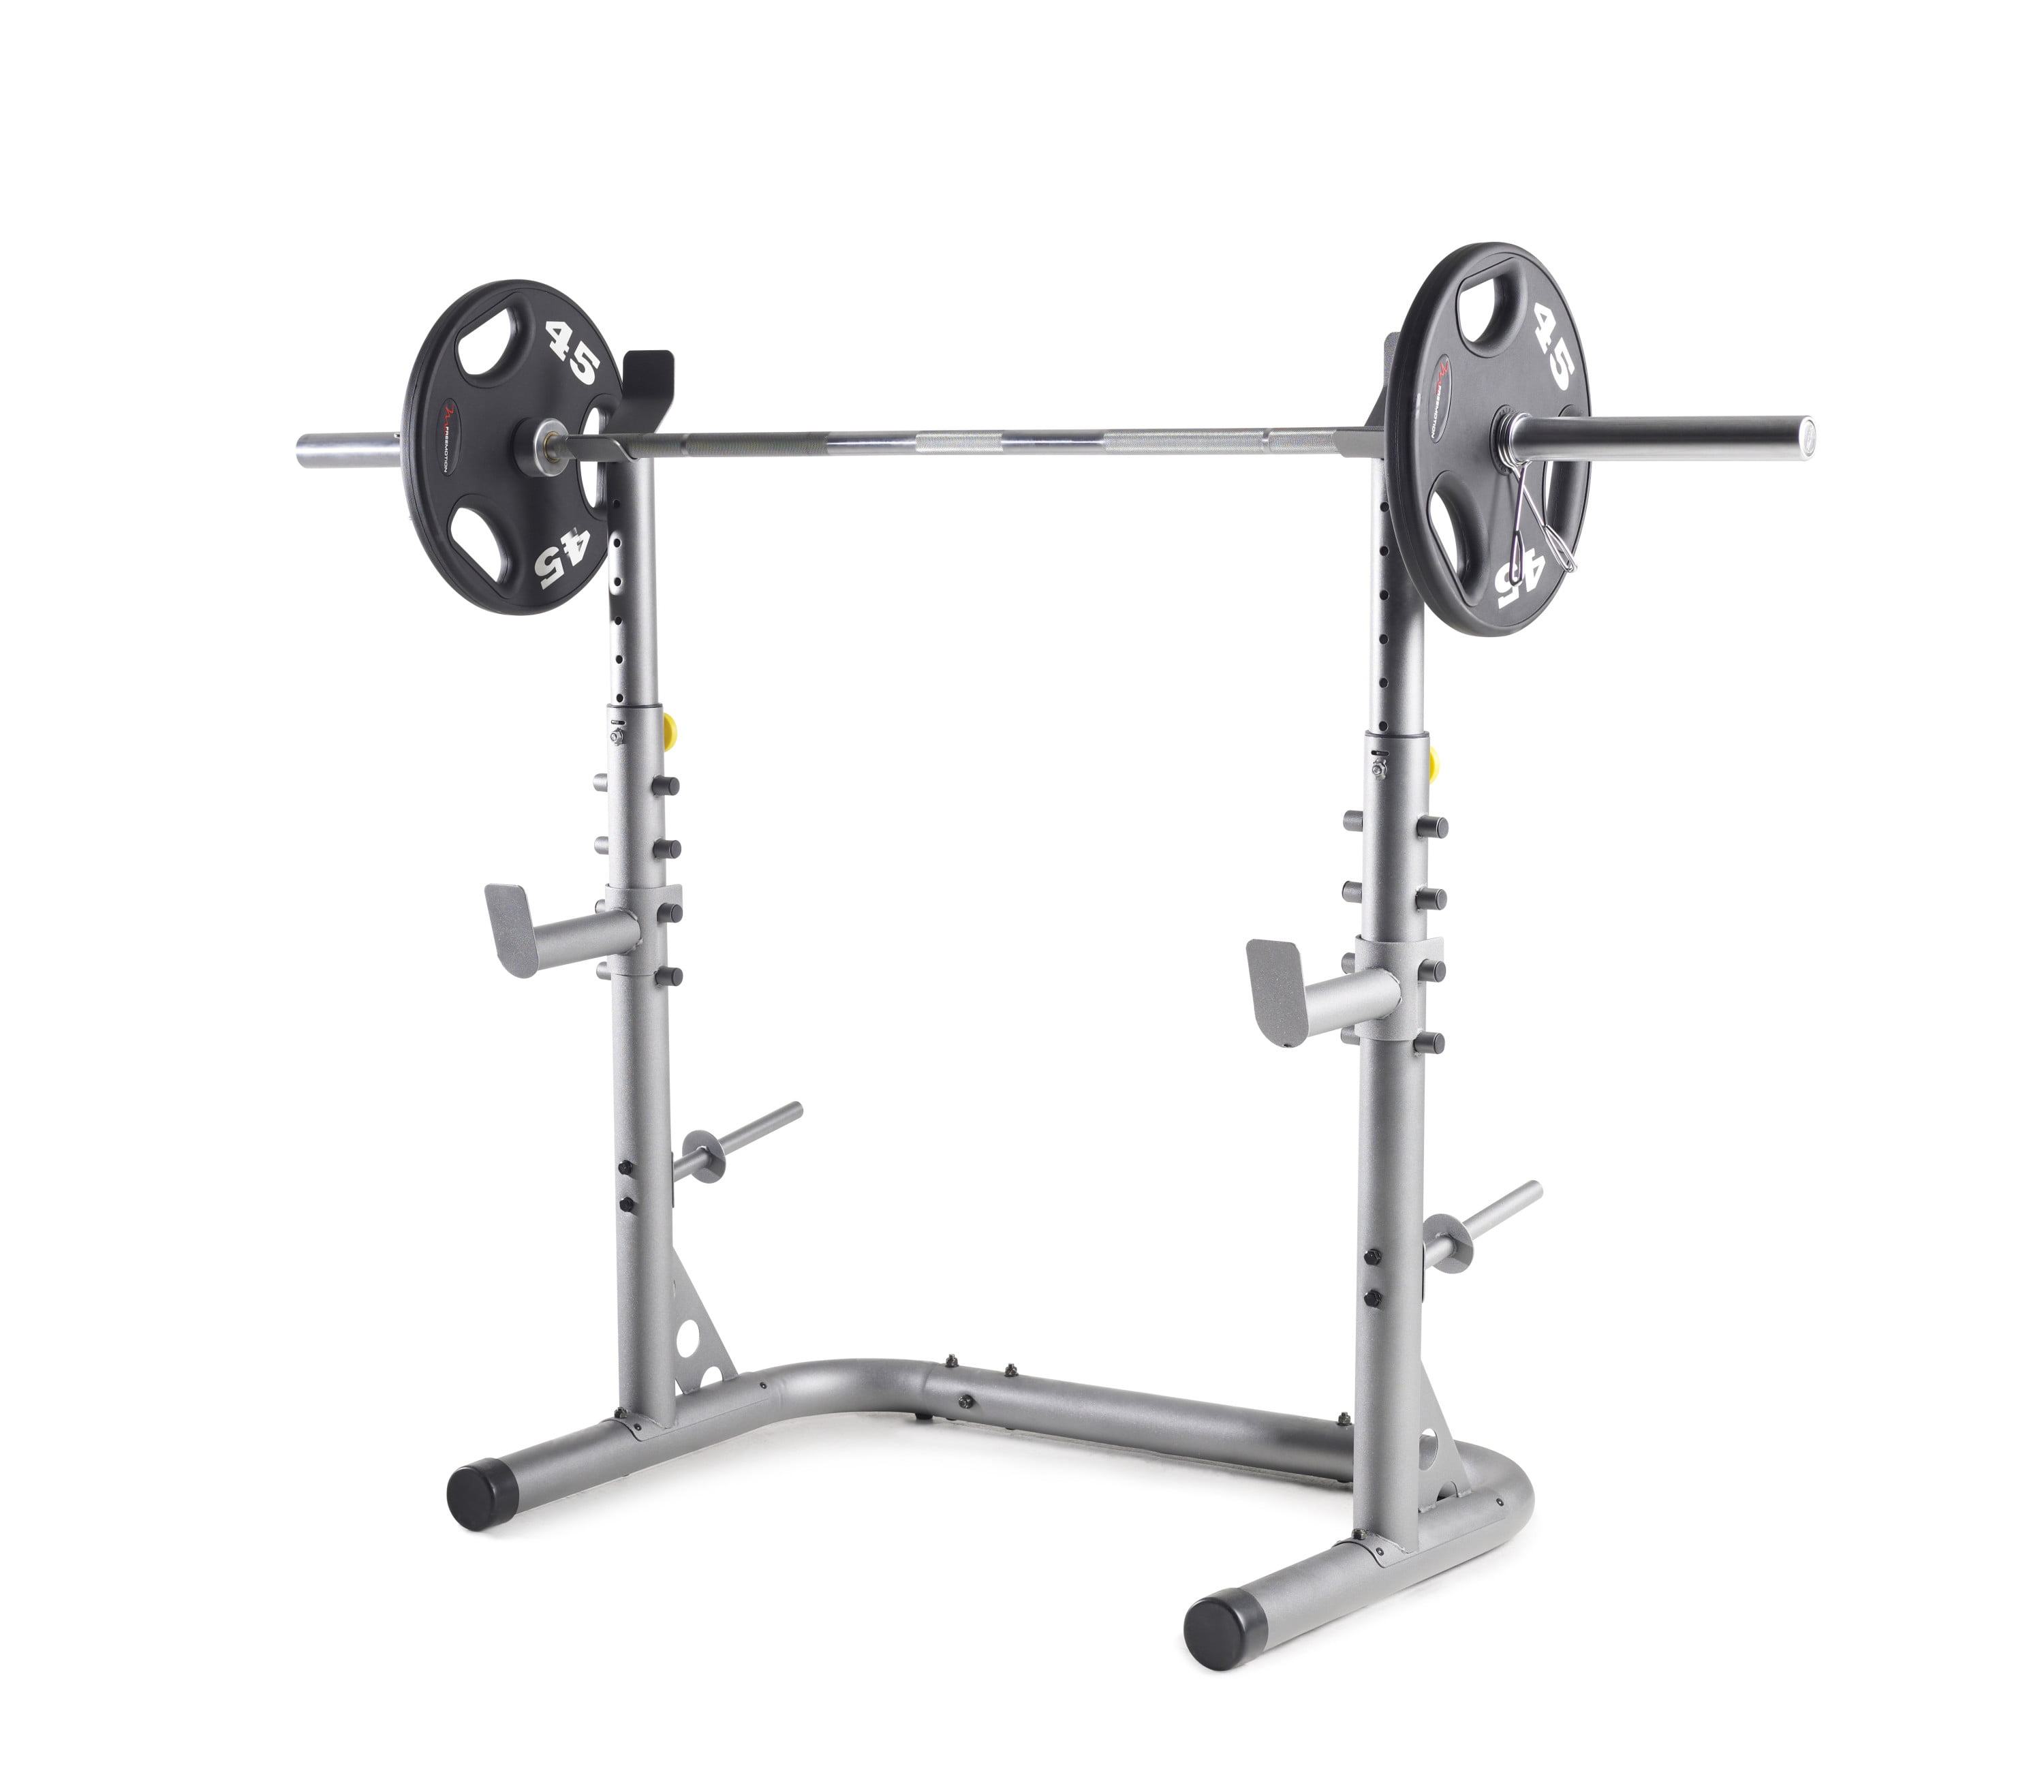 Weider XRS 20 Olympic Squat Rack (300 Lb Weight Limit) $69 + Free Shipping